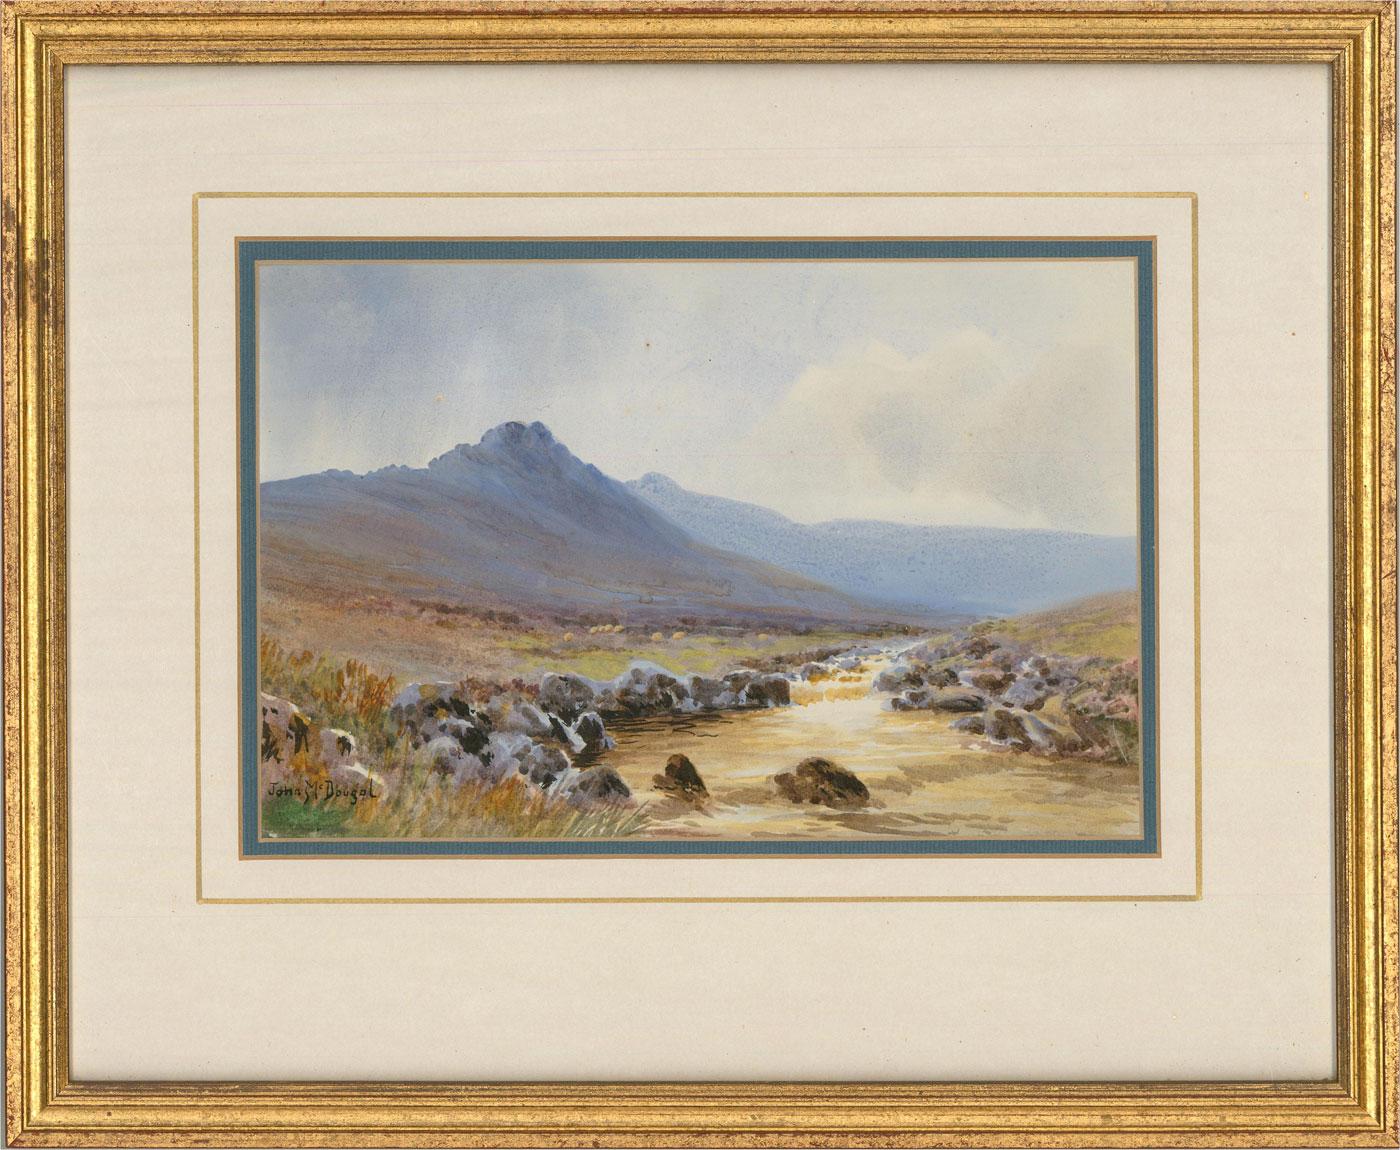 A picturesque scene by a river in the mountains. Sheep can be seen grazing in the distance. Presented glazed in a white and blue double mount and a distressed gilt-effect wooden frame. Signed to the lower-left edge. There is a label on the verso